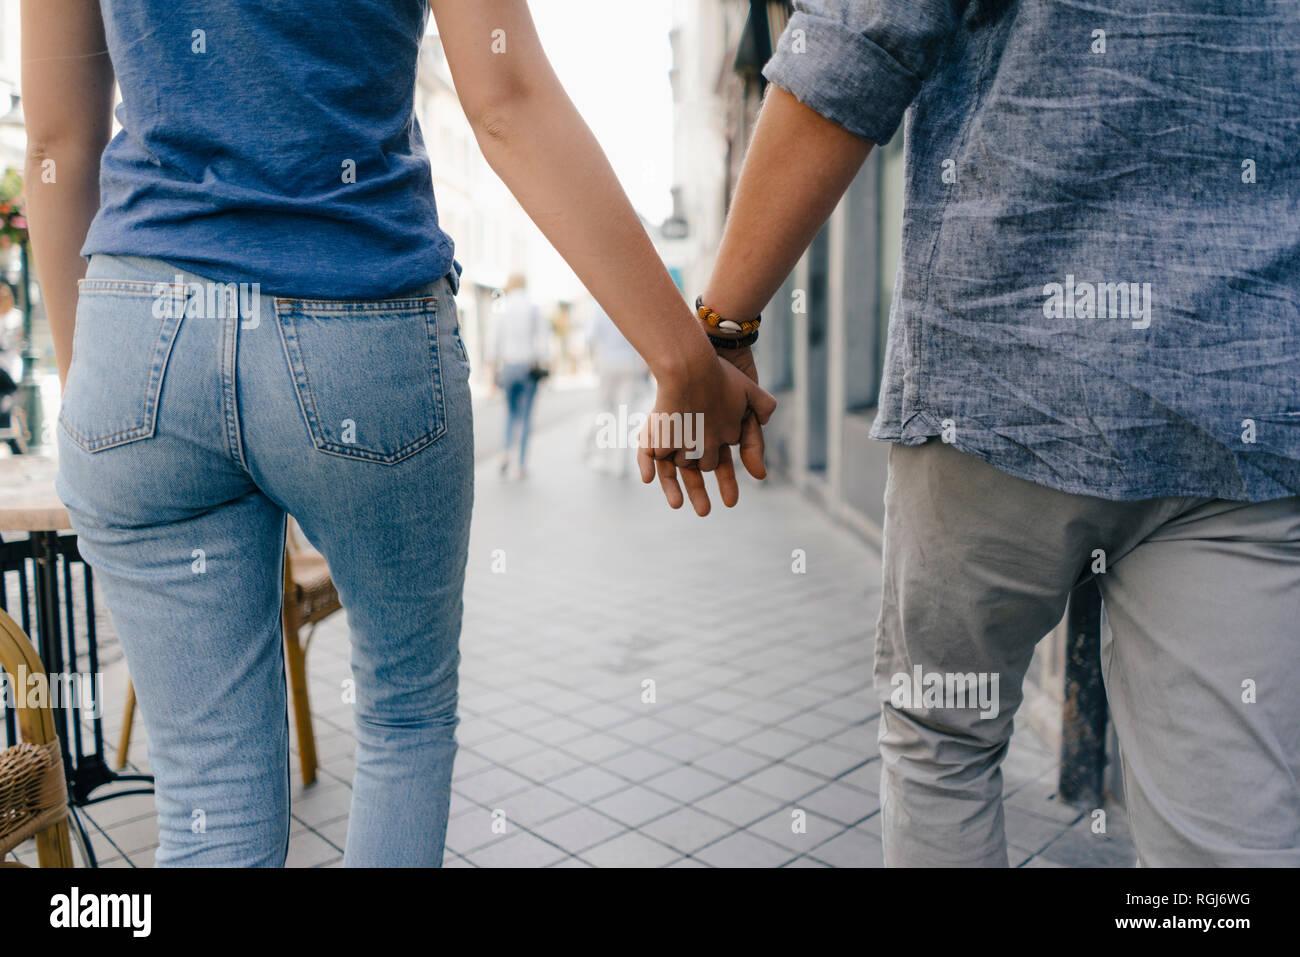 Netherlands, Maastricht, close-up of young couple walking hand in hand in the city Stock Photo